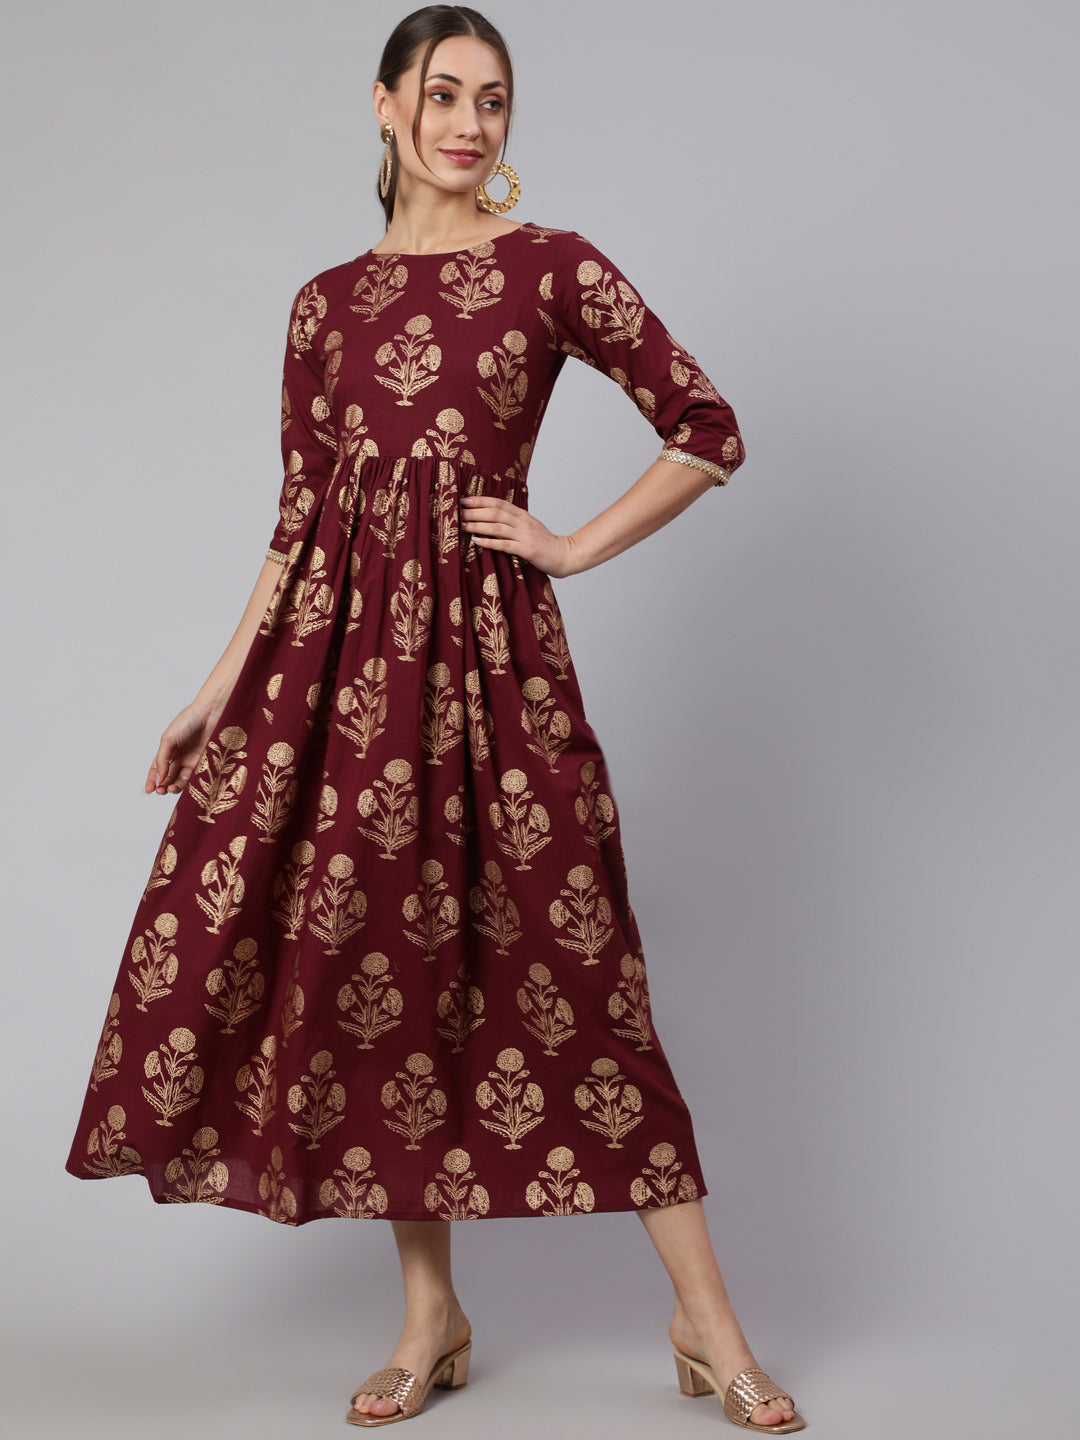 Women's Wome Burgundy Printed Flared Dress With Three quarter Sleeves - Nayo Clothing